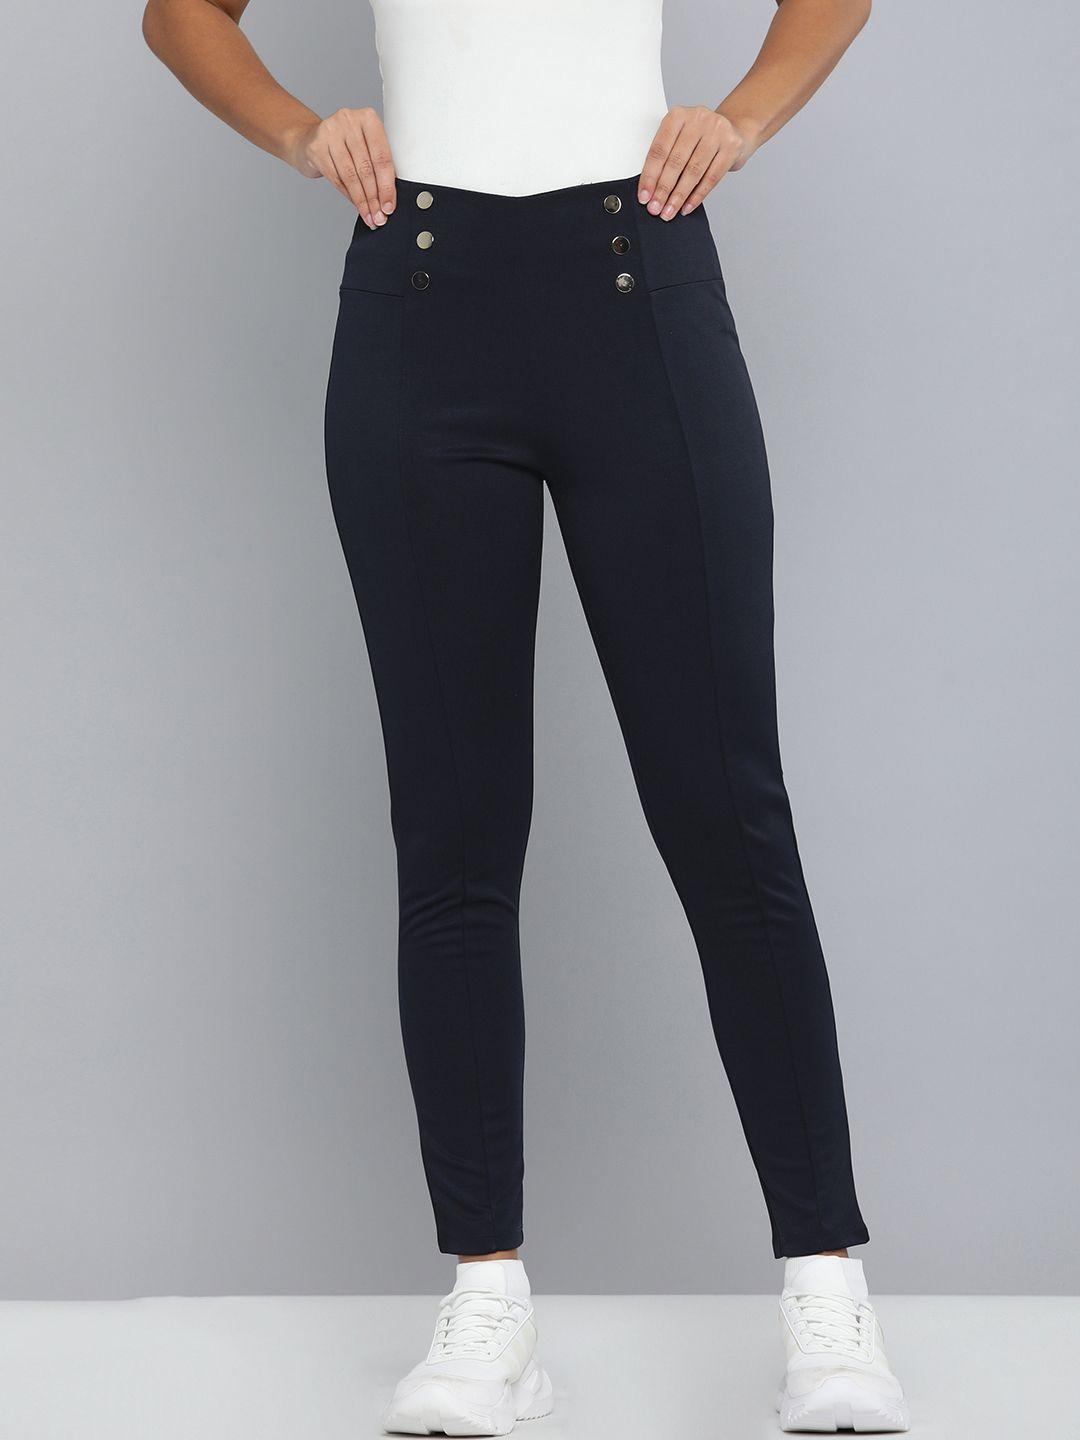 here&now women navy blue solid treggings